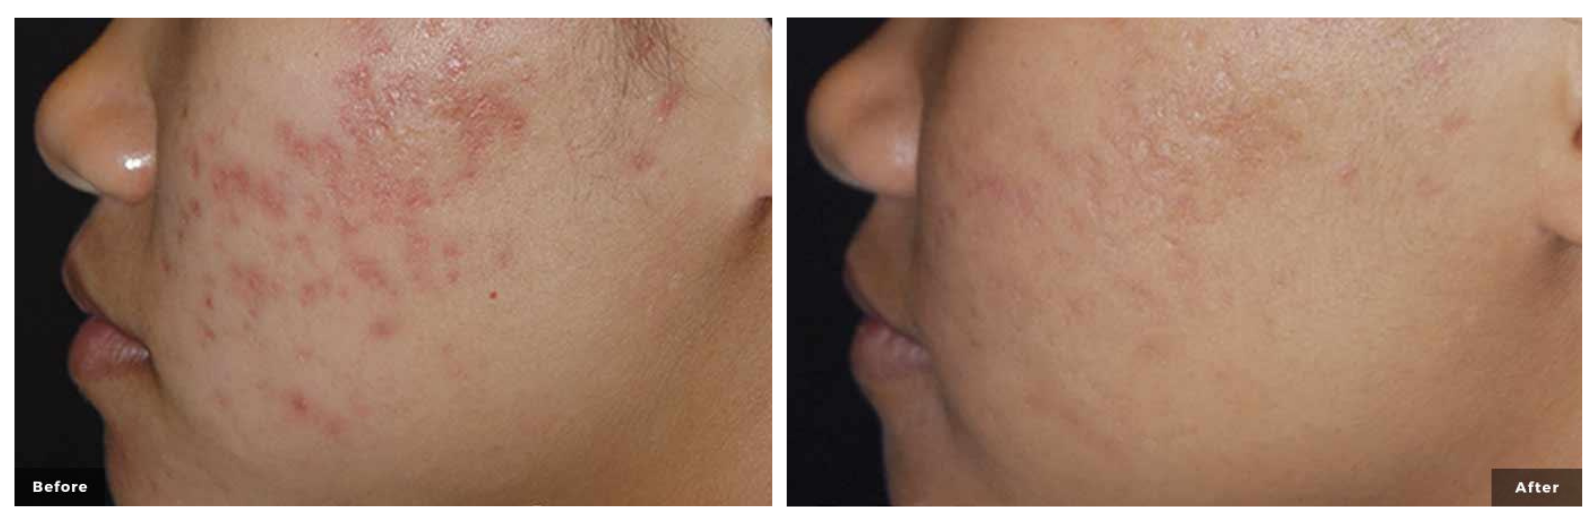 before after treatment surani clinic